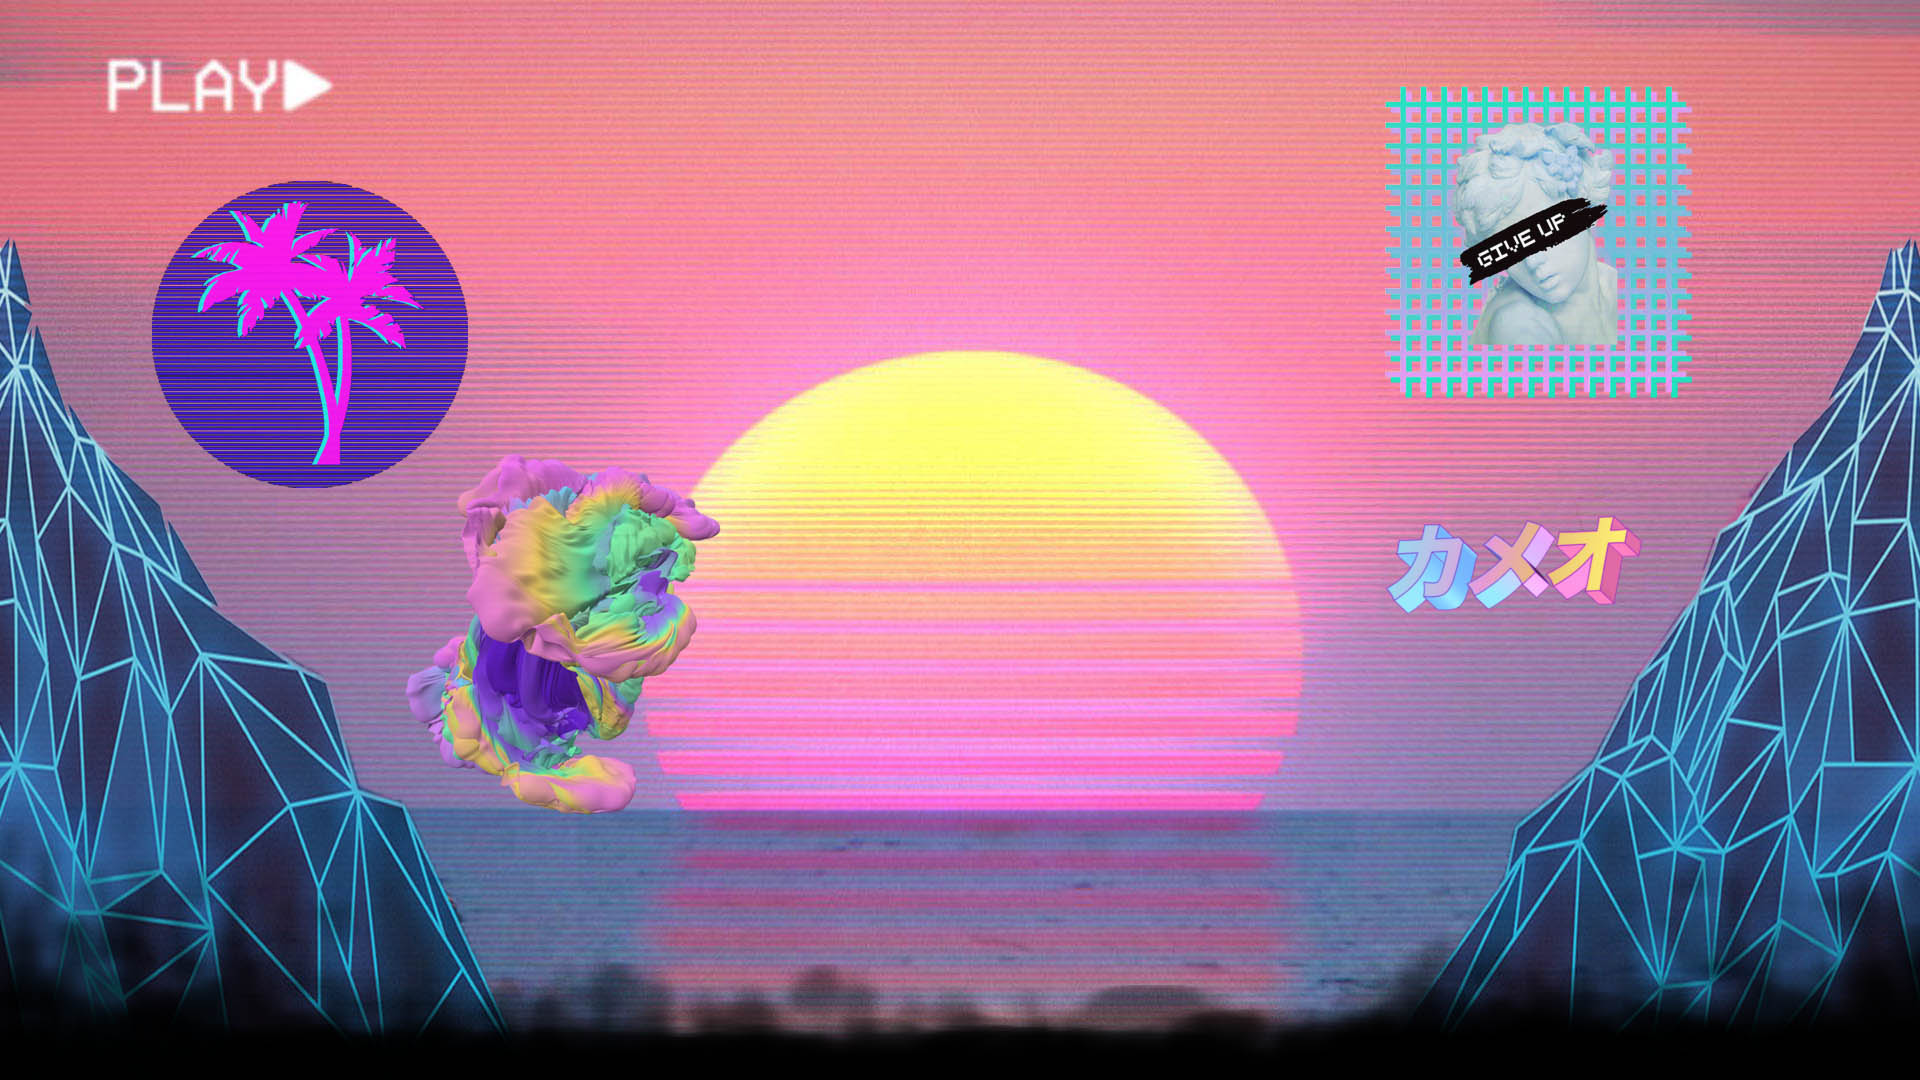 Steam Community Guide The Most Vaporwave Aesthetic